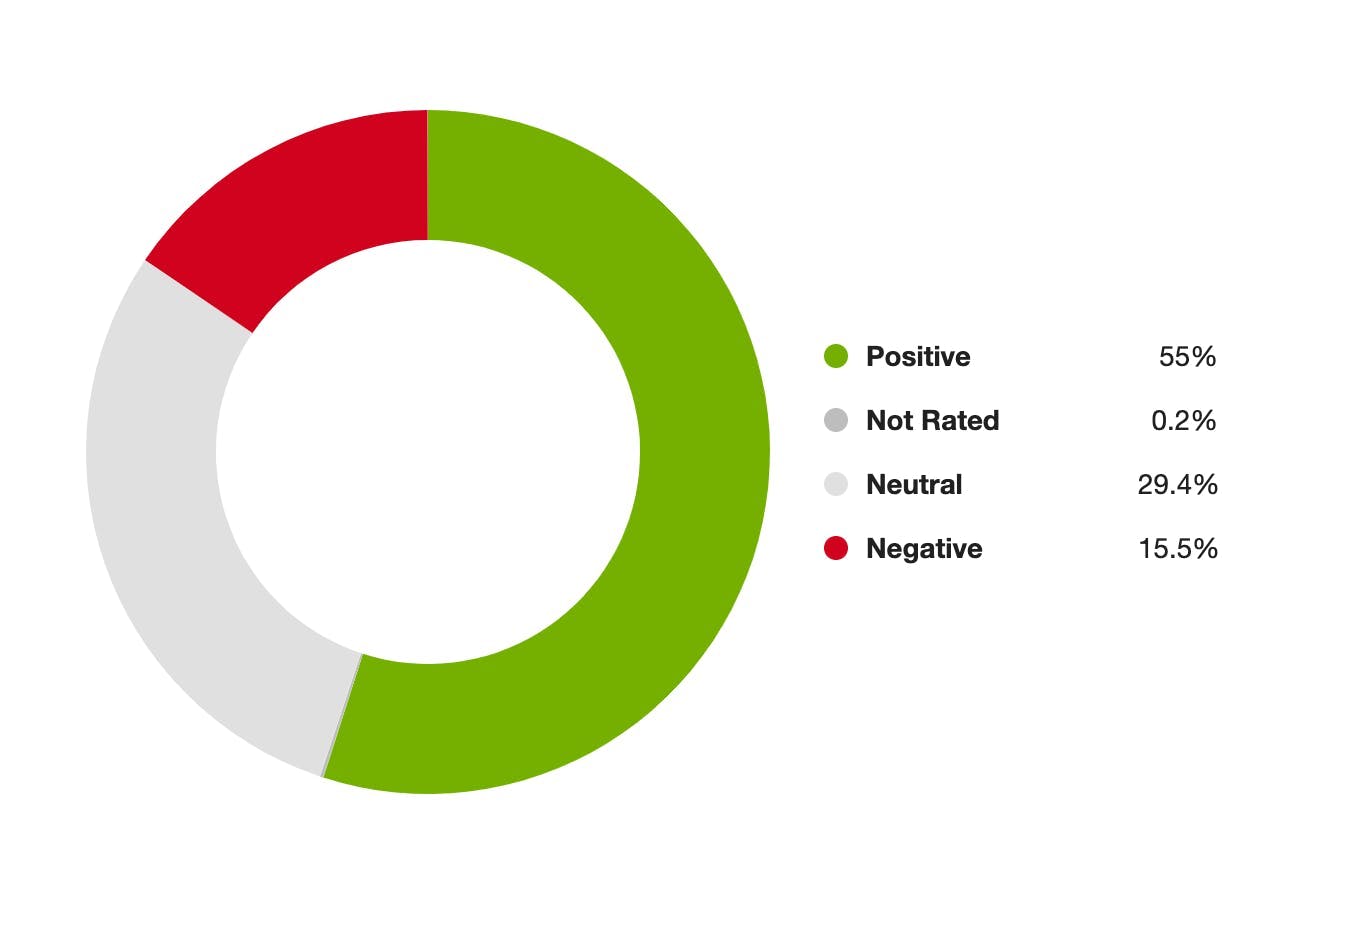 A ring chart showing mentions the sentiment of mentions of Linda Martell from March 27 to April 2 with 55% positive sentiment.